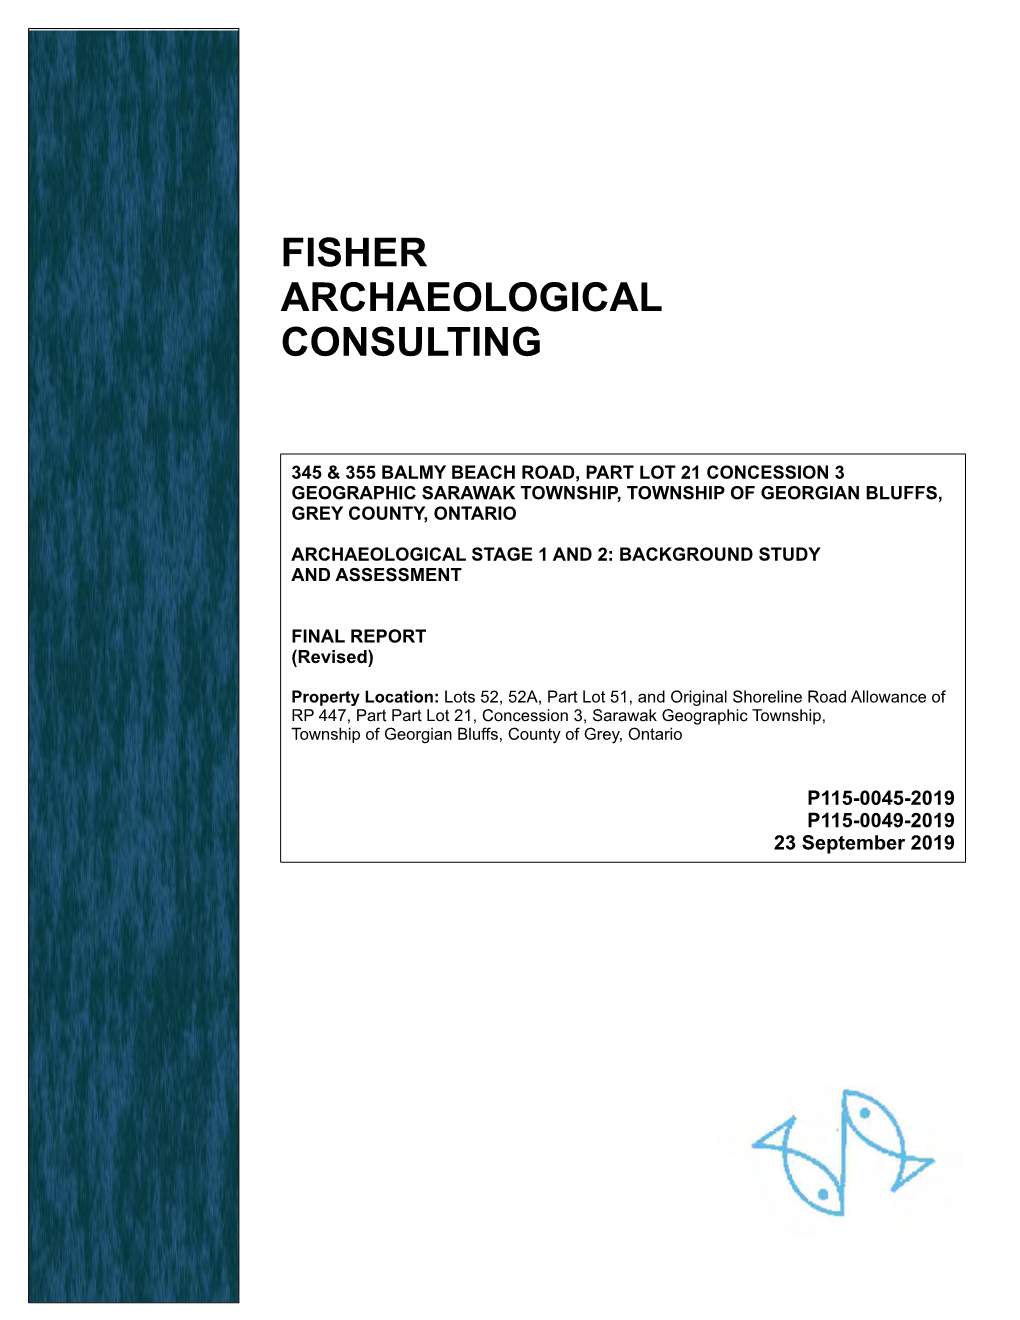 Fisher Archaeological Consulting